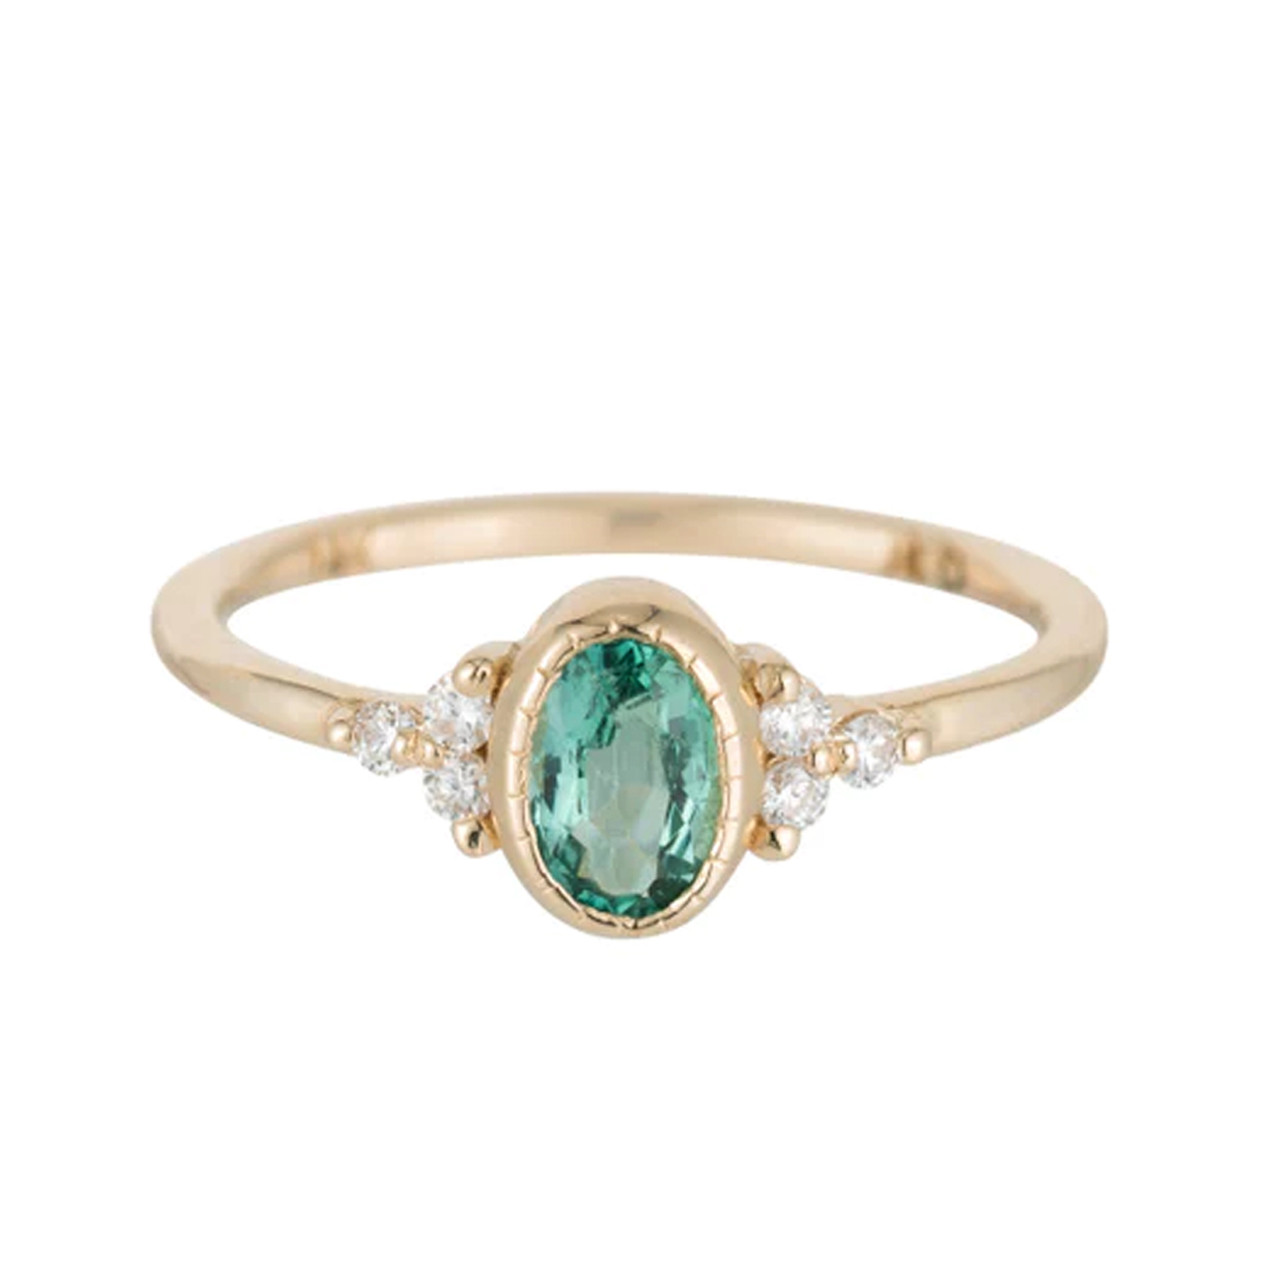 Oval Emerald Crossover Ring with Diamond Accents | Angara